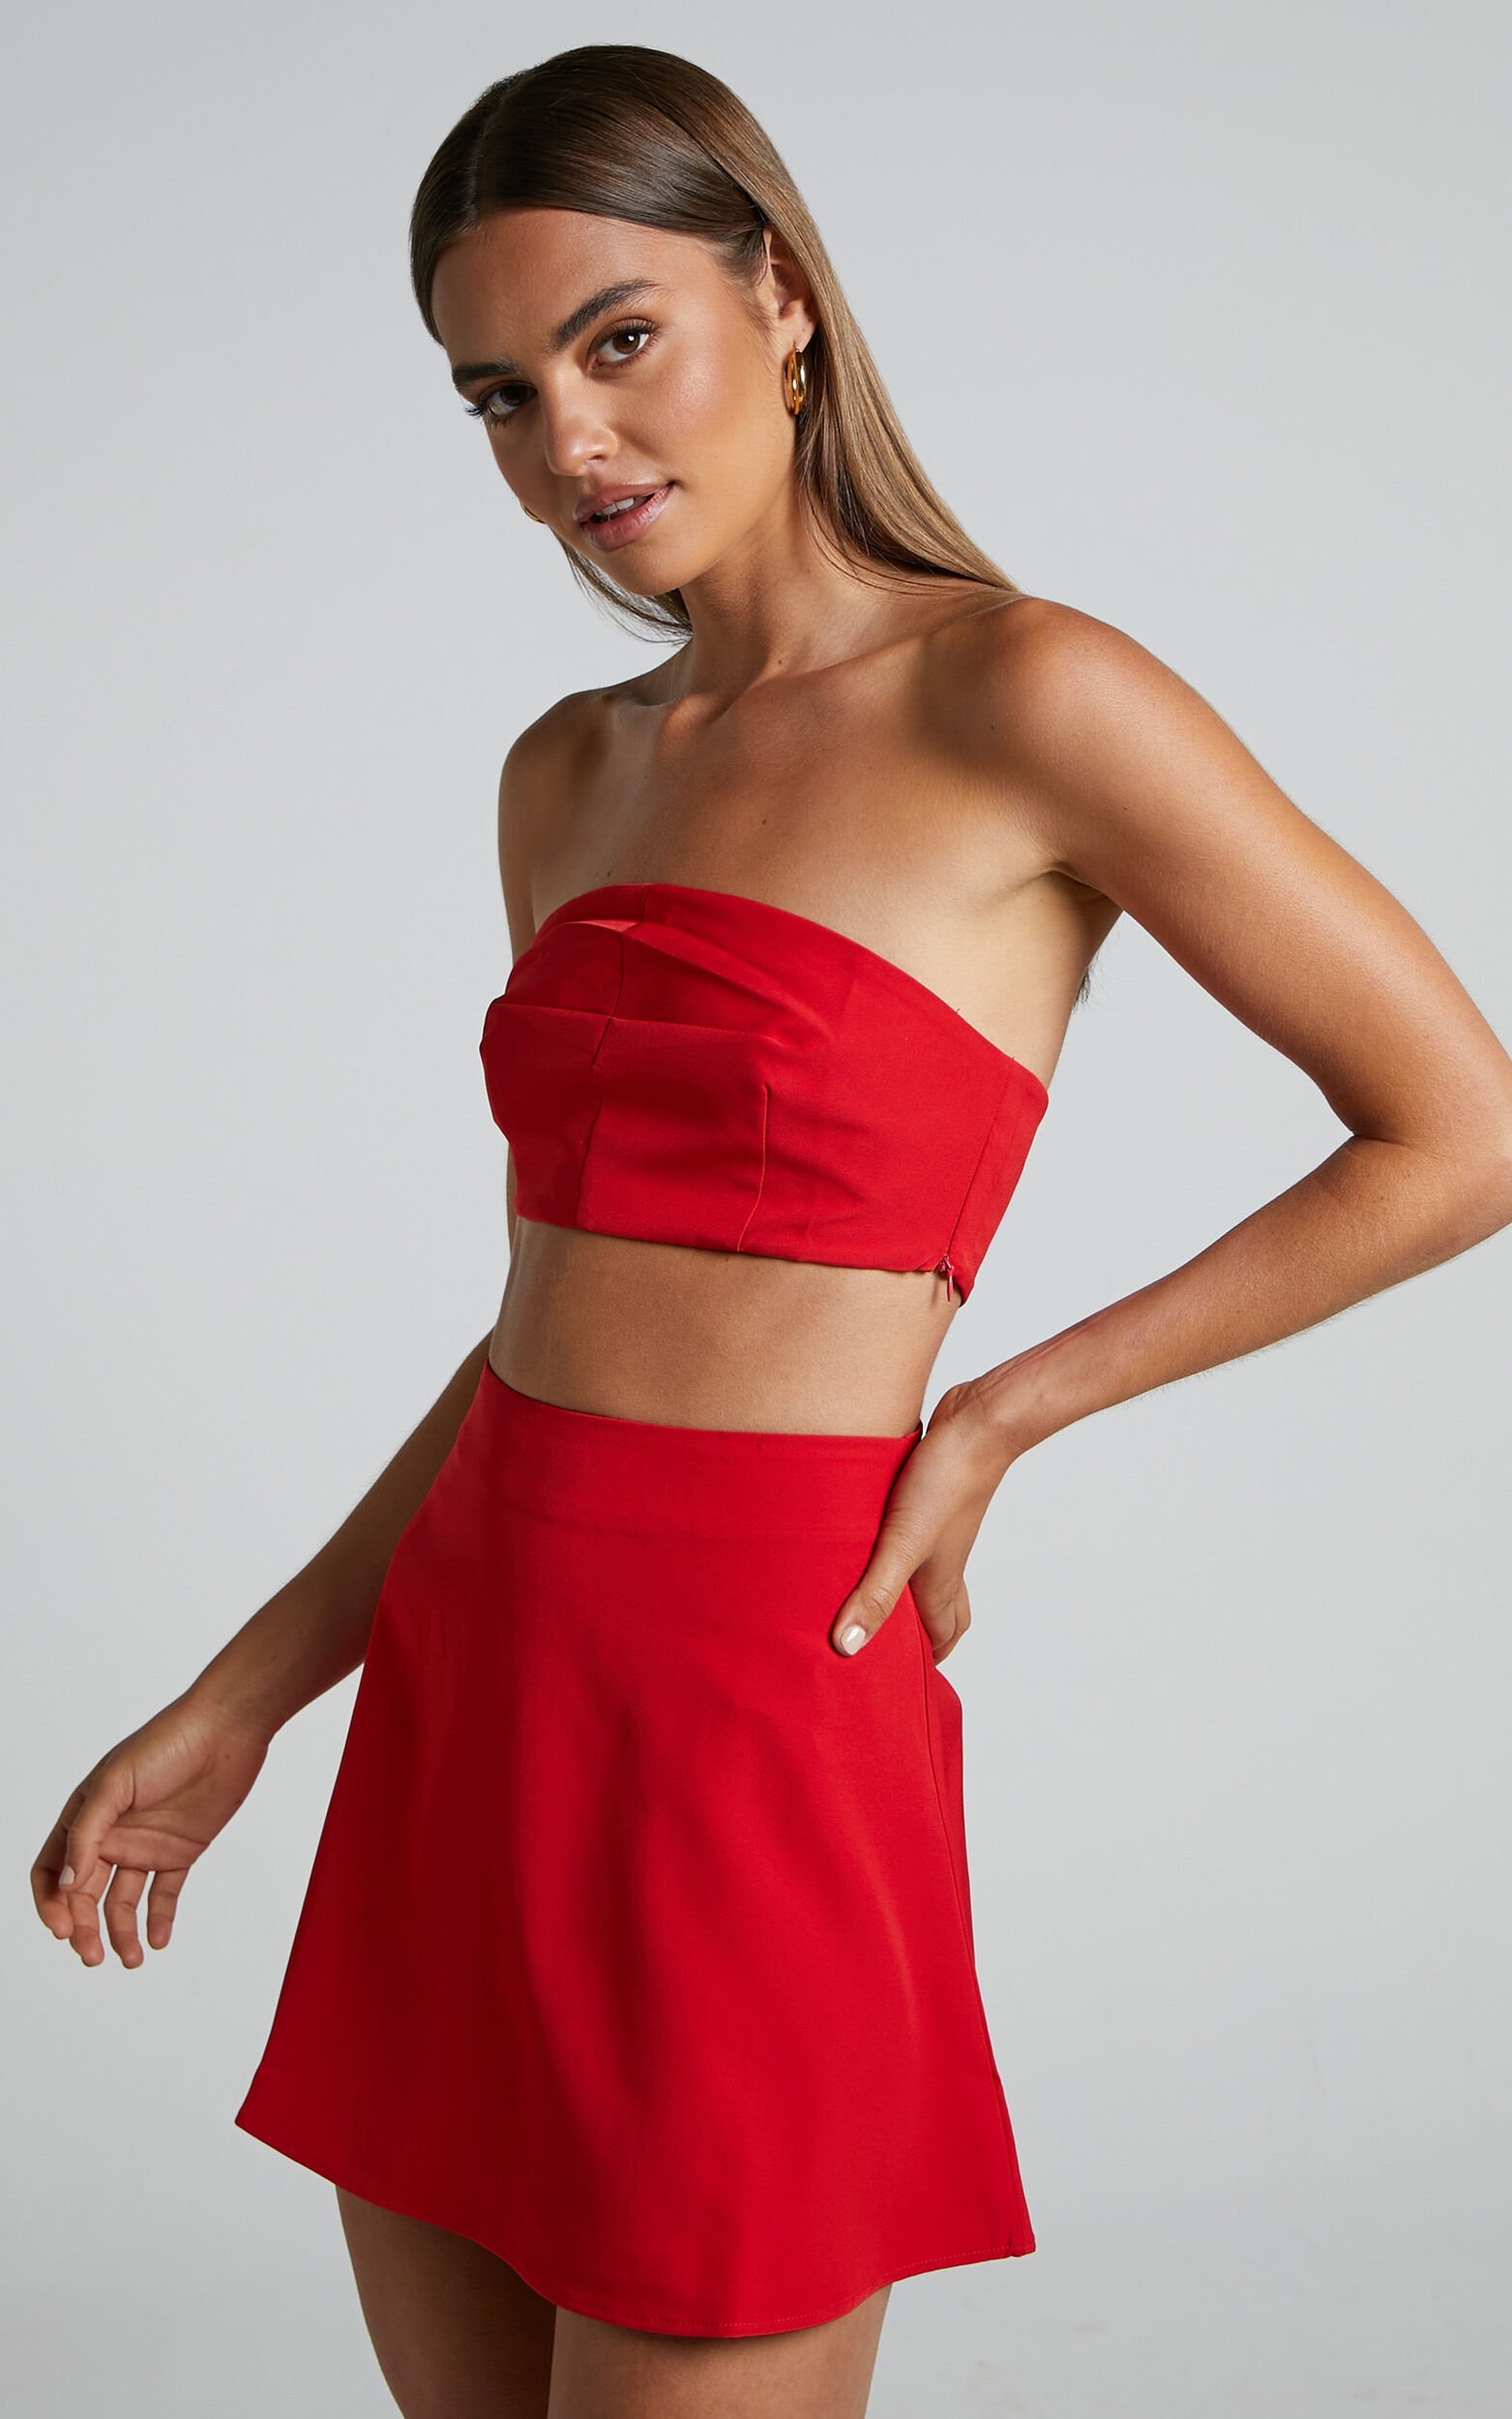 Khirara Two Piece Set - Strapless Bandeau Crop Top and Mini Skirt in Red